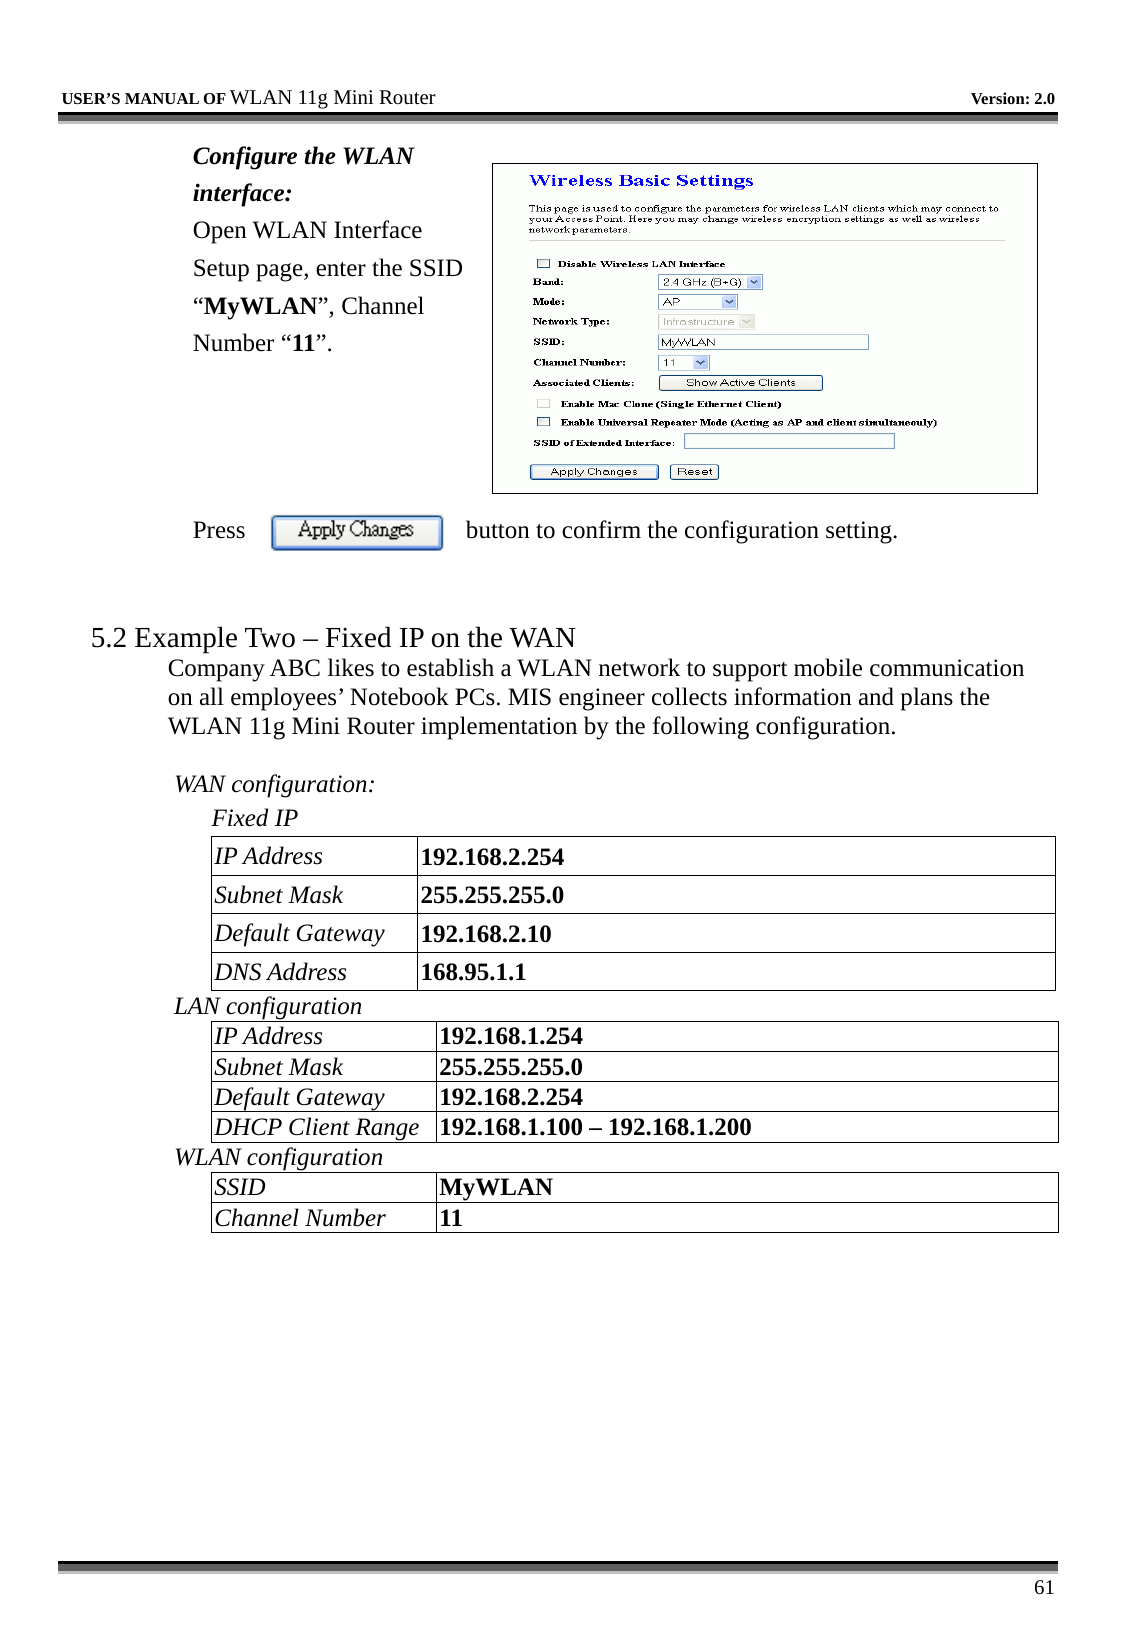   USER’S MANUAL OF WLAN 11g Mini Router   Version: 2.0     61 Configure the WLAN interface:  Open WLAN Interface Setup page, enter the SSID “MyWLAN”, Channel Number “11”.     Press  button to confirm the configuration setting.   5.2 Example Two – Fixed IP on the WAN Company ABC likes to establish a WLAN network to support mobile communication on all employees’ Notebook PCs. MIS engineer collects information and plans the WLAN 11g Mini Router implementation by the following configuration.  WAN configuration:   Fixed IP IP Address  192.168.2.254 Subnet Mask  255.255.255.0 Default Gateway  192.168.2.10 DNS Address  168.95.1.1 LAN configuration IP Address  192.168.1.254 Subnet Mask  255.255.255.0 Default Gateway  192.168.2.254 DHCP Client Range  192.168.1.100 – 192.168.1.200 WLAN configuration SSID  MyWLAN Channel Number  11 